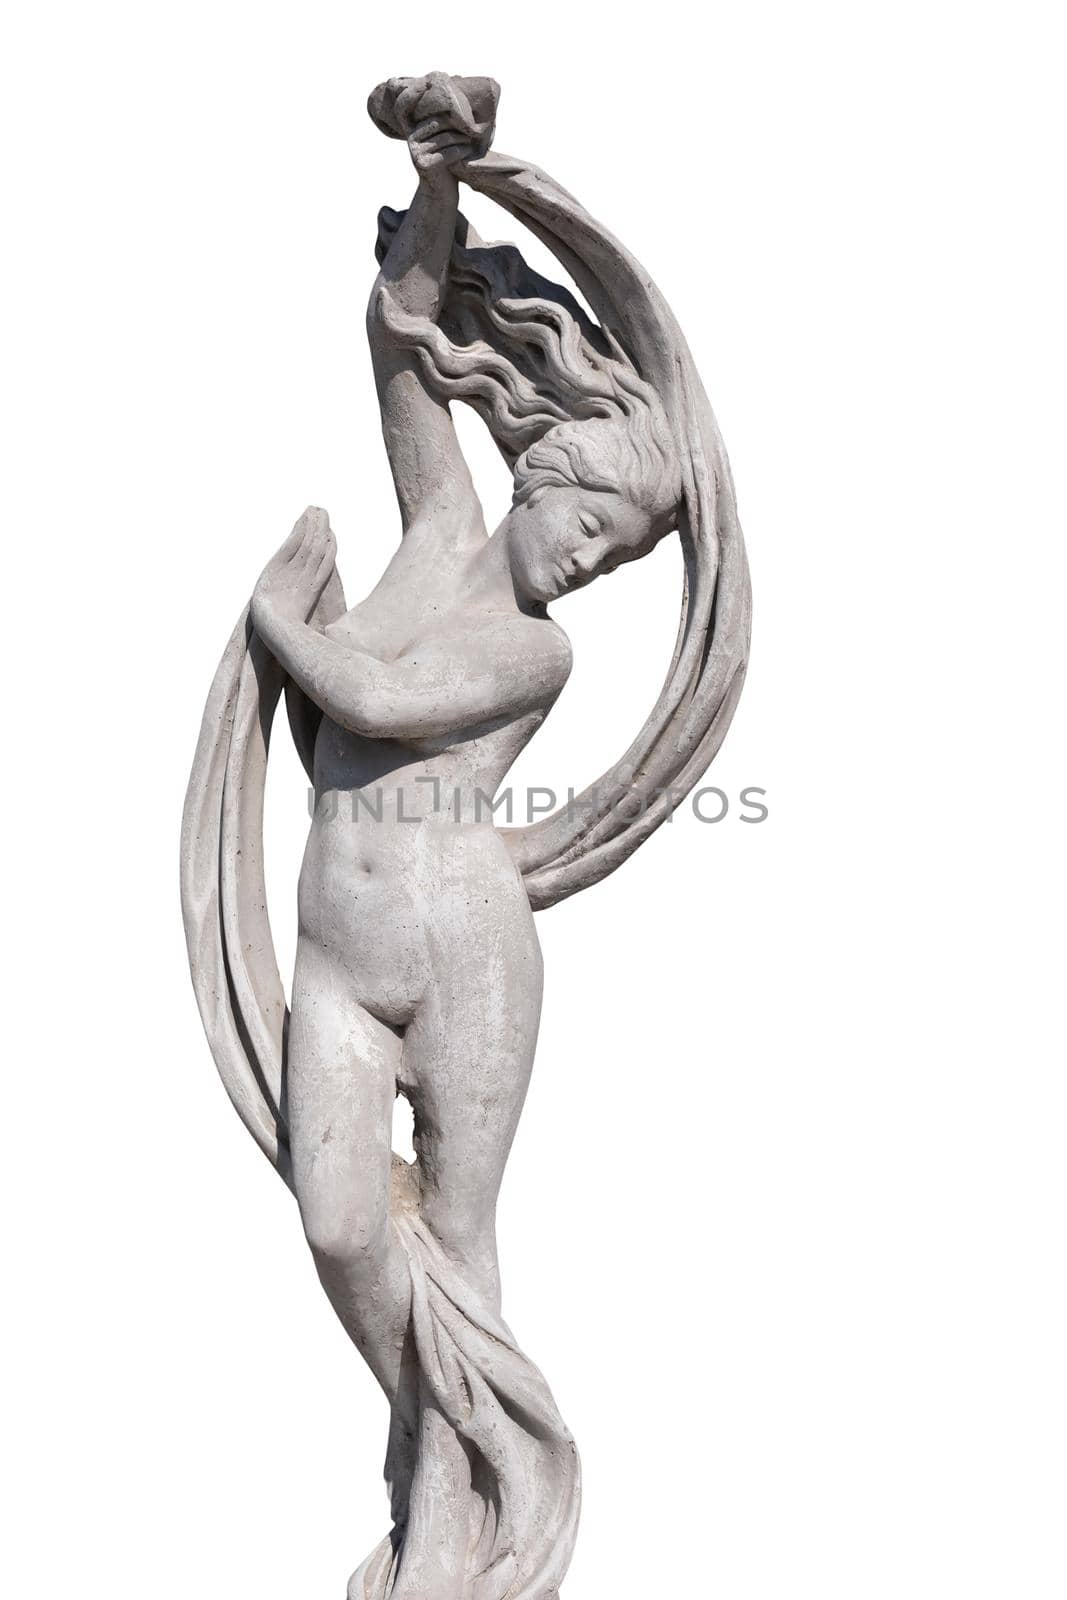 Stone sculpture of naked woman holding fabric on white background. art and classical style romantic figurative stone sculpture.